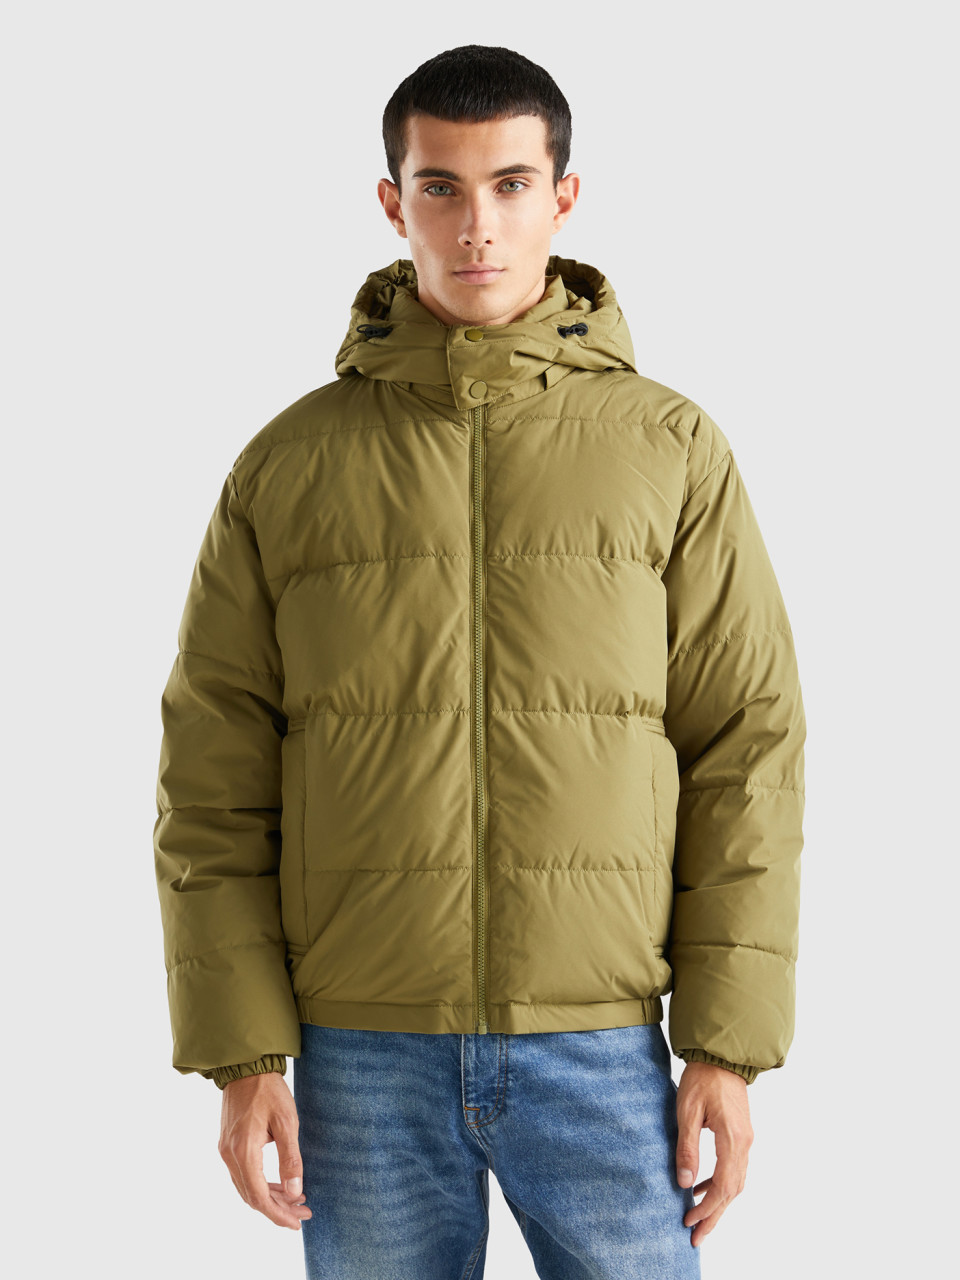 Benetton, Padded Jacket With Removable Hood, Military Green, Men